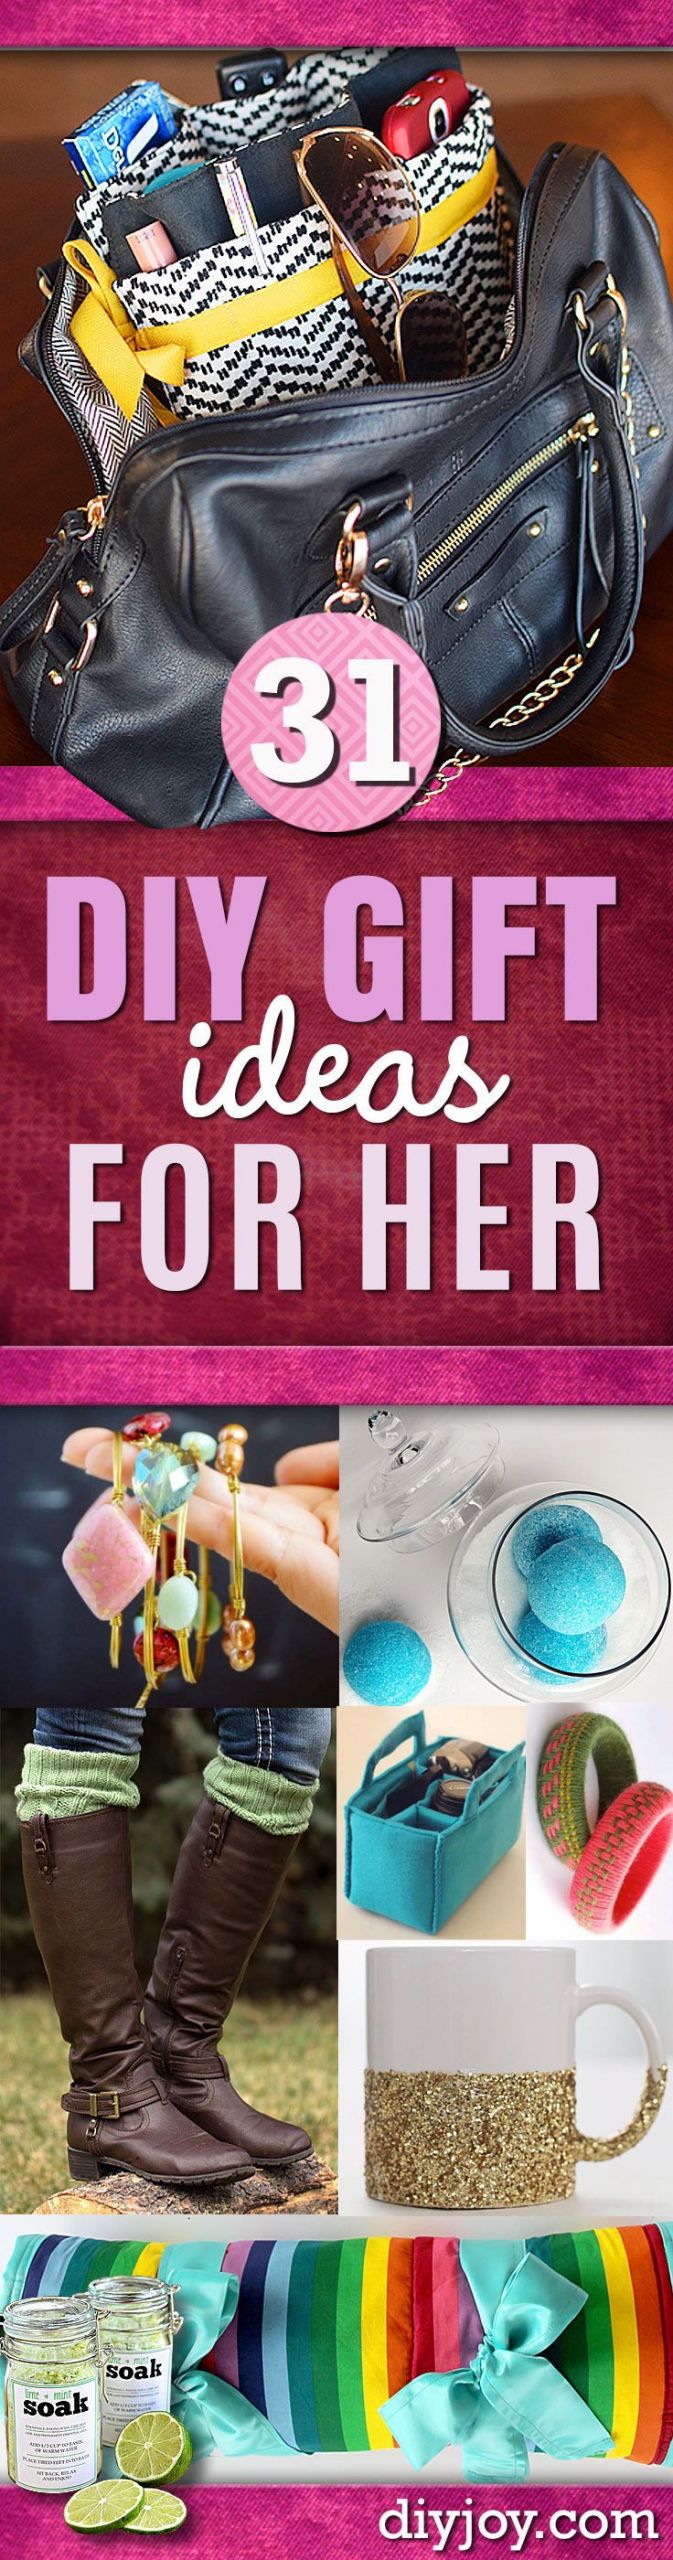 Simple Gift Ideas For Girlfriend
 Super Special DIY Gift Ideas for Her DIY JOY